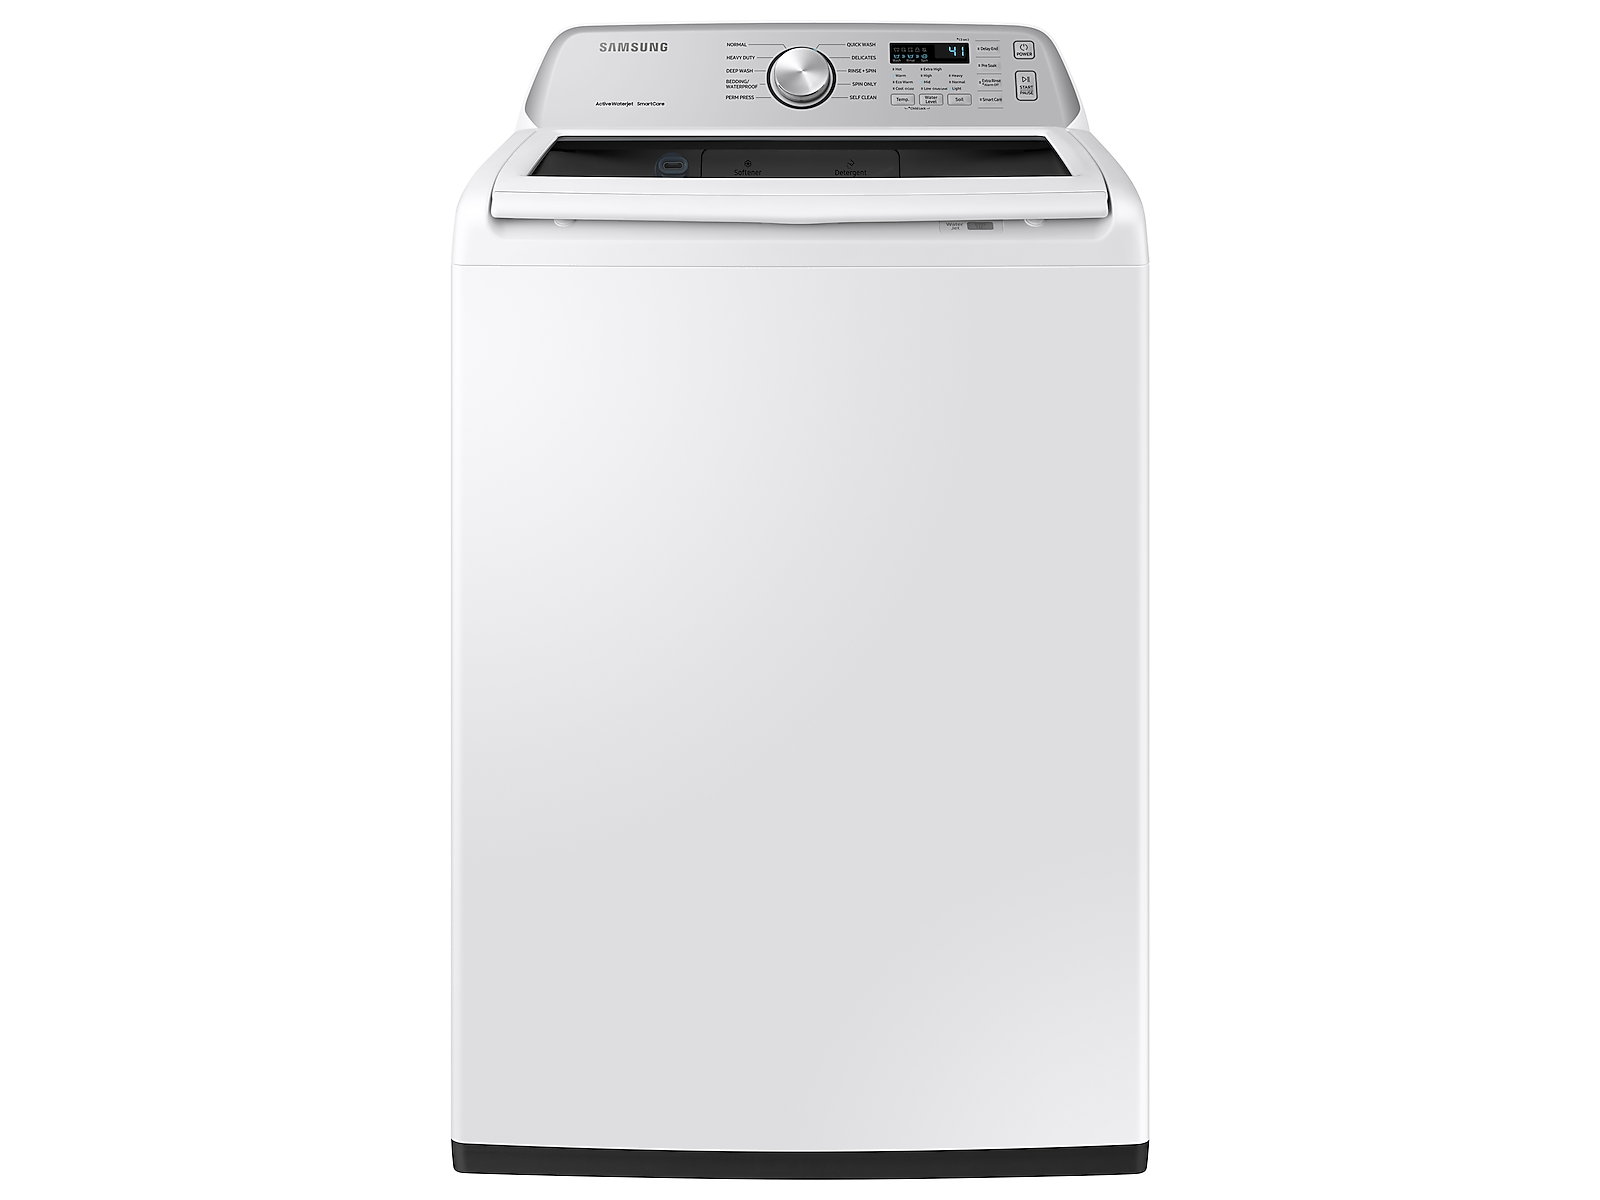 Samsung 4.5 cu. ft. Capacity Top Load Washer with Active WaterJet in White(WA45T3400AW/A4) photo